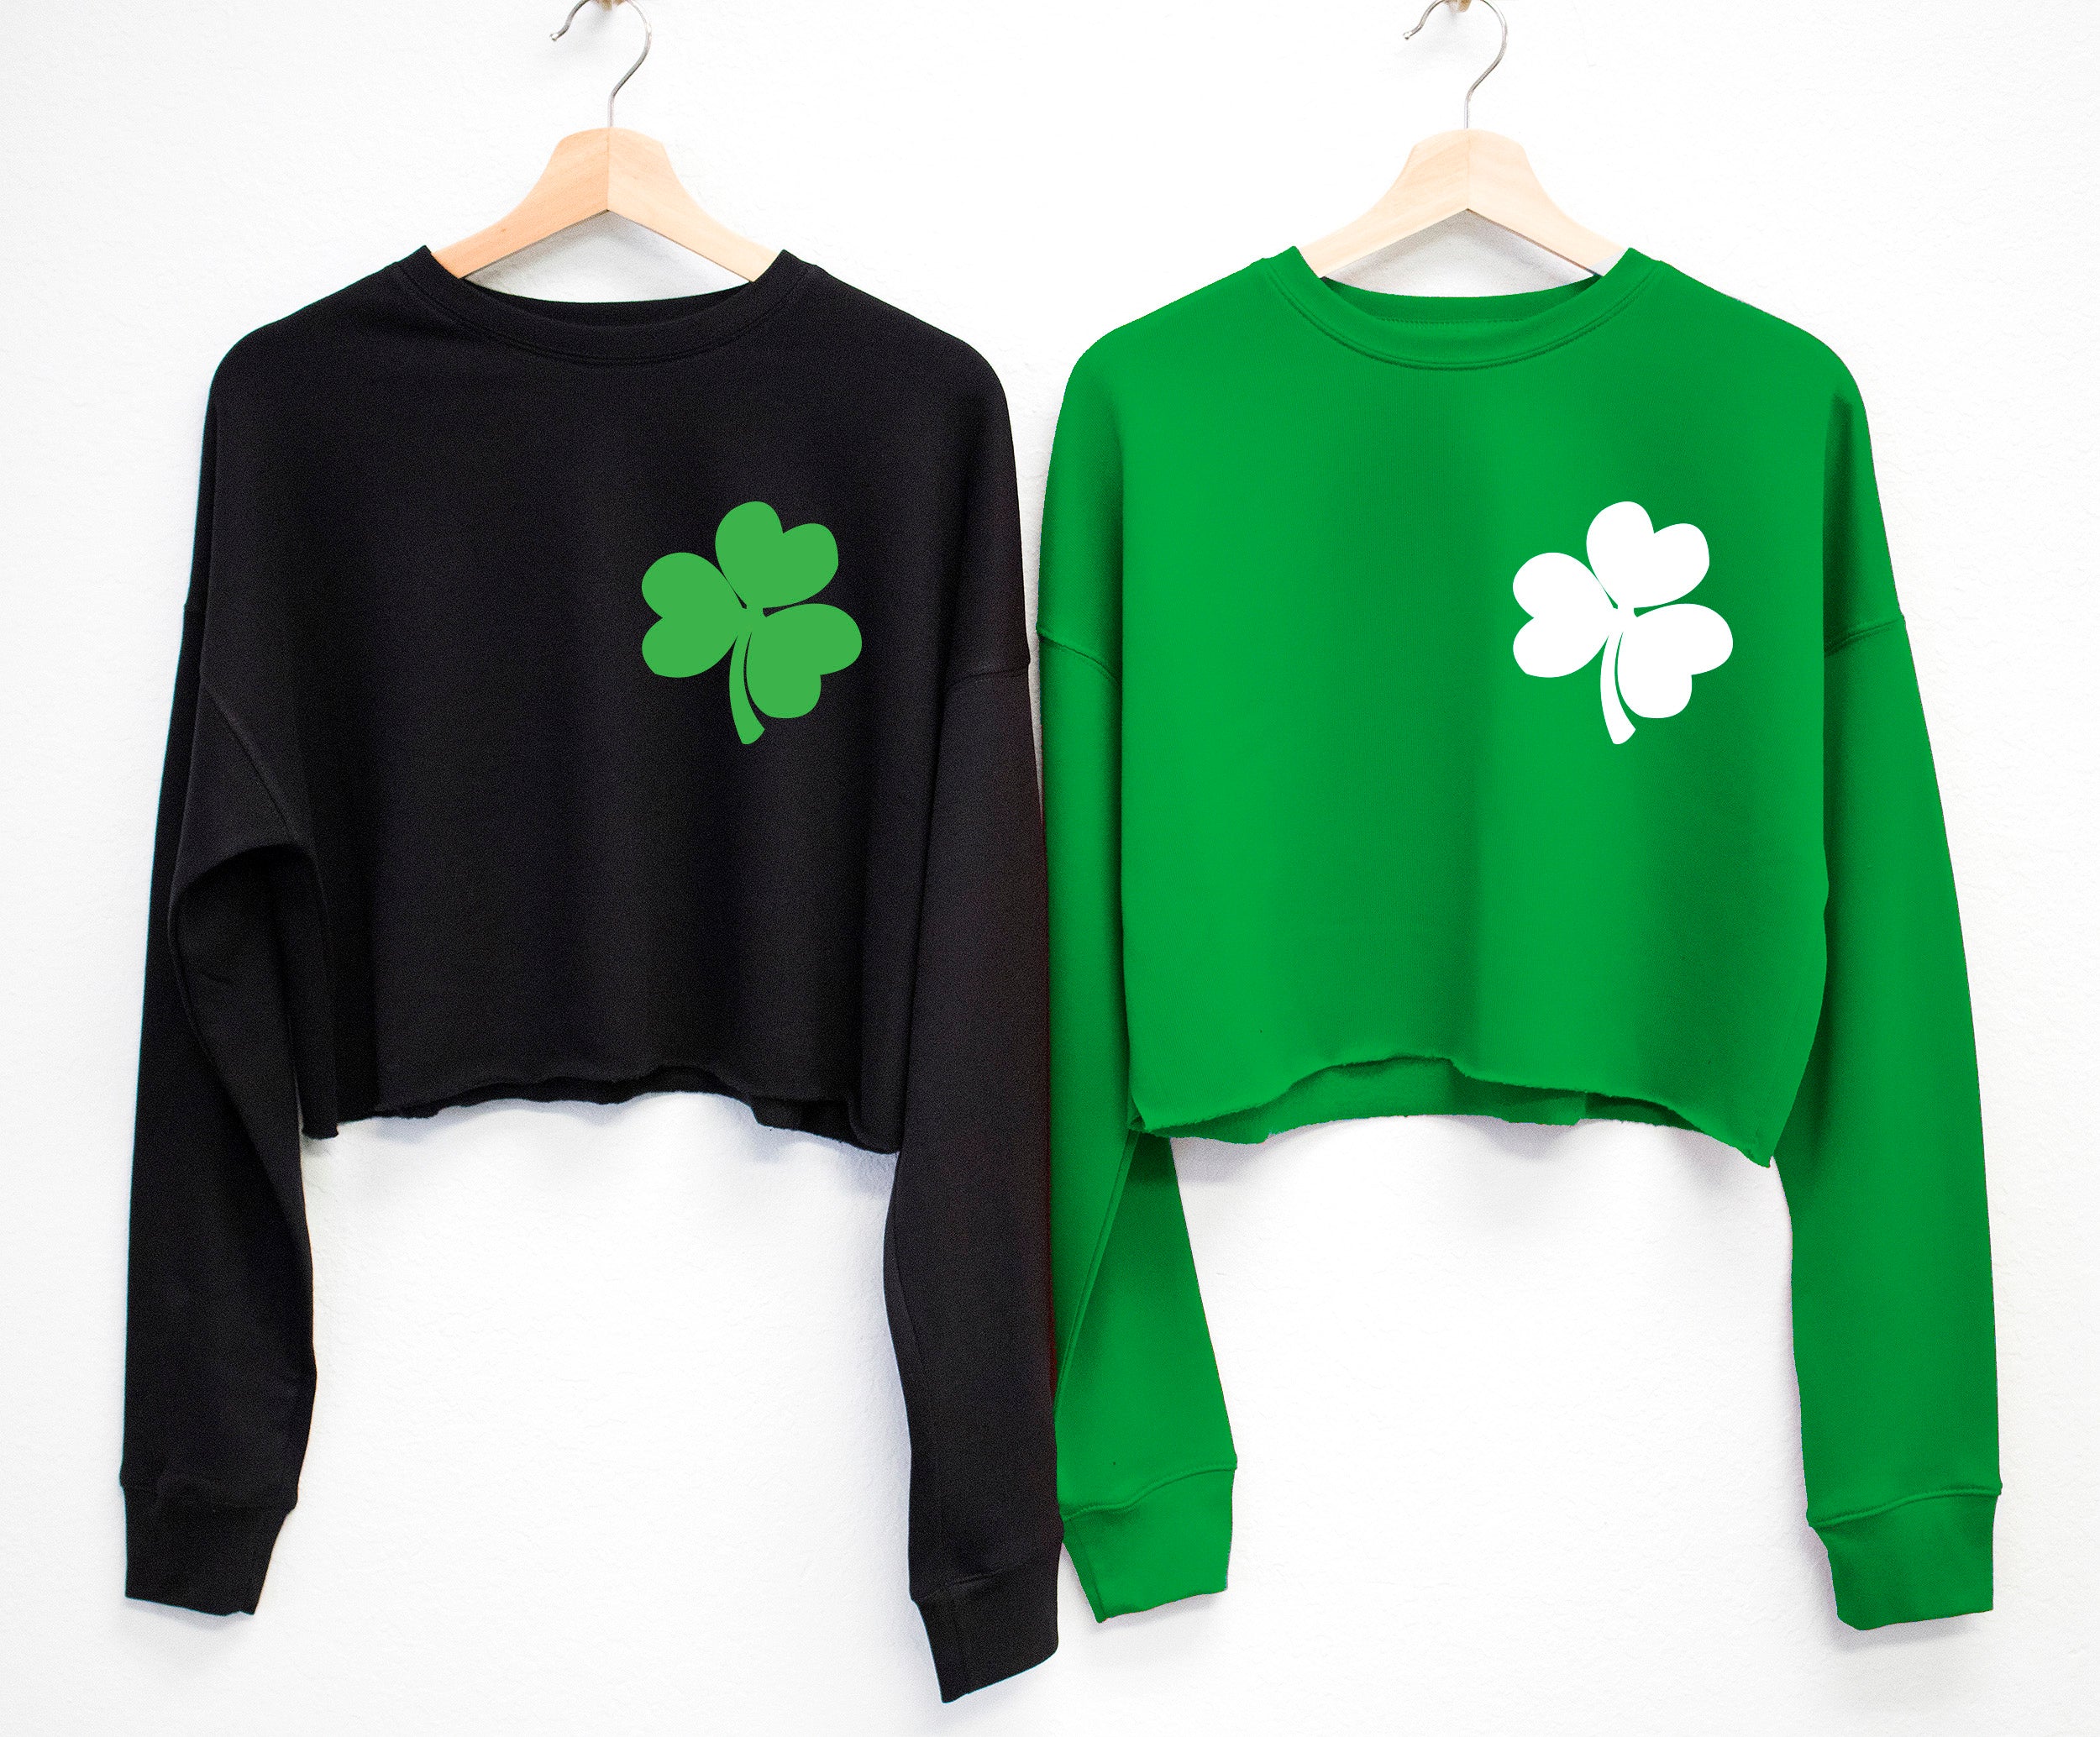 St. Patrick's Day Sweaters Ideas for the Entire Family